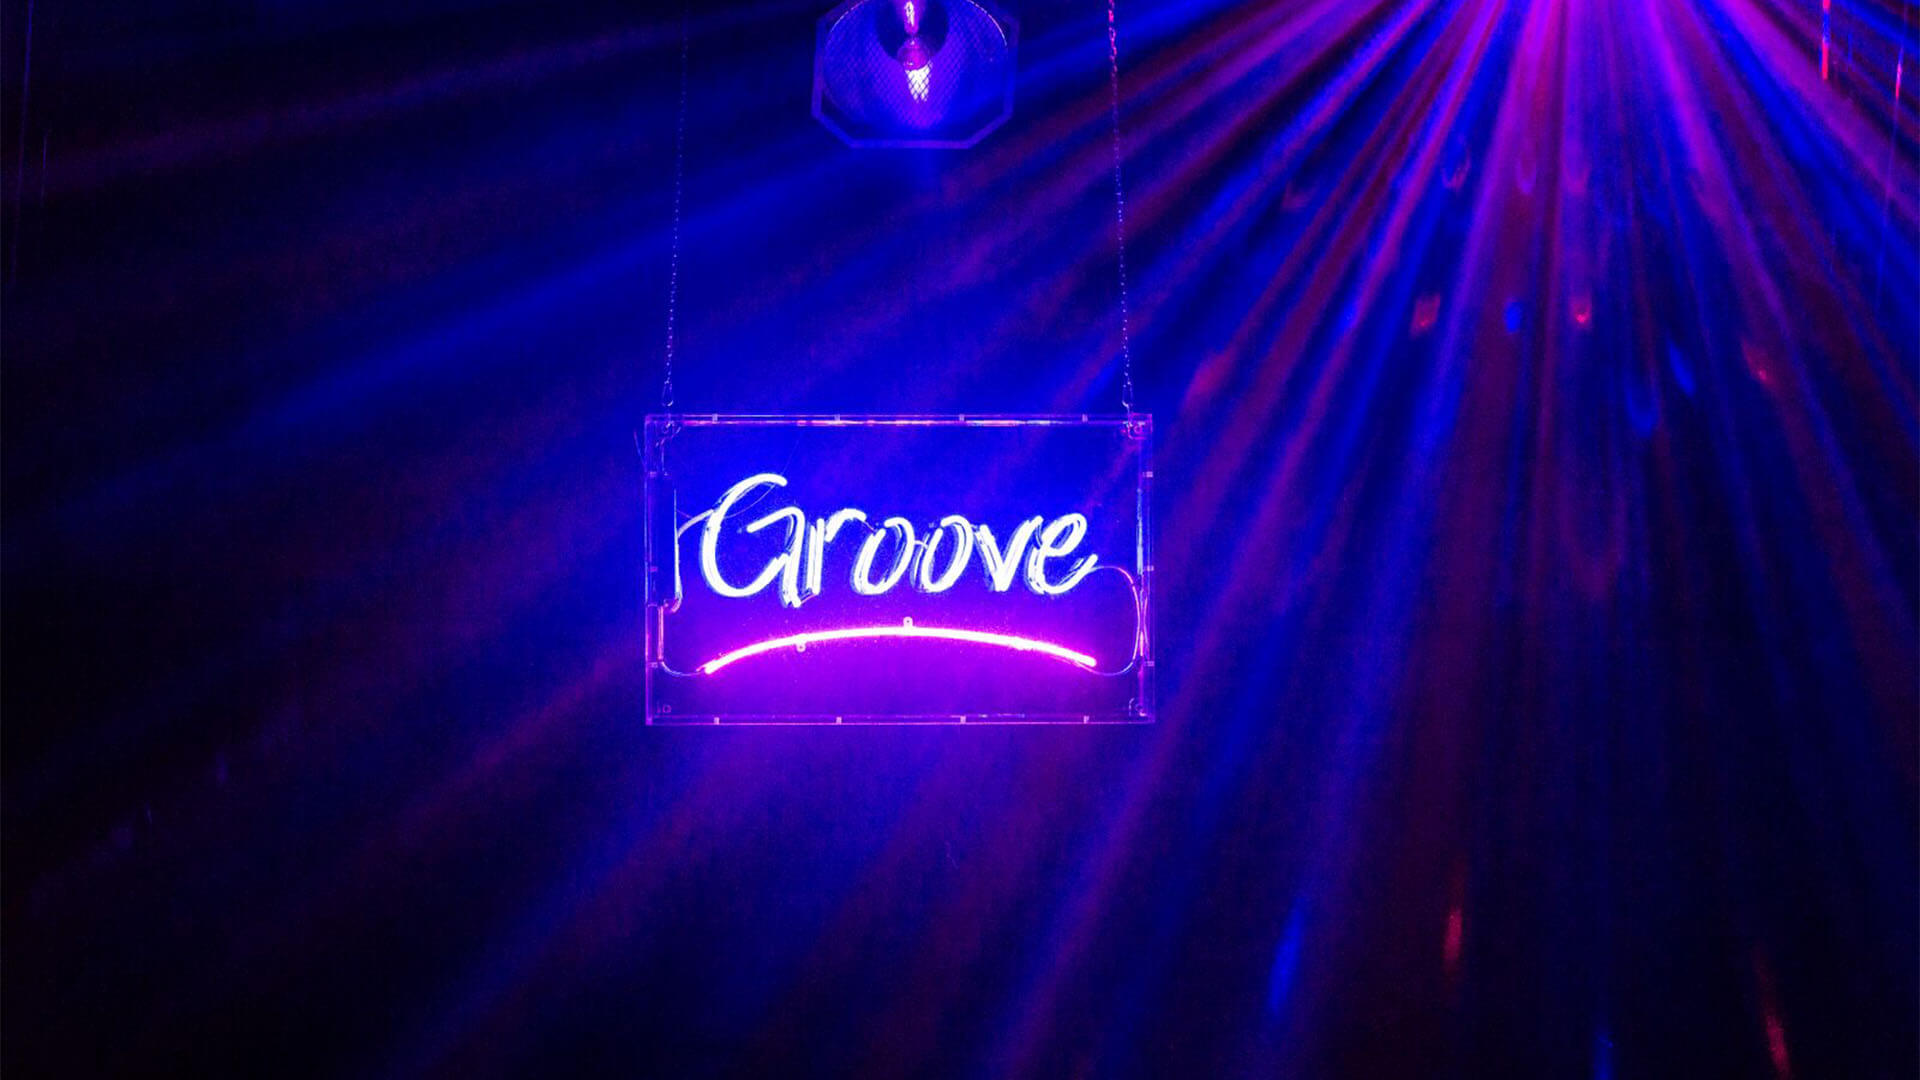 A neon sign hangs from the ceiling that reads: “Groove”. The word glows in blue and there is a red line underneath it.